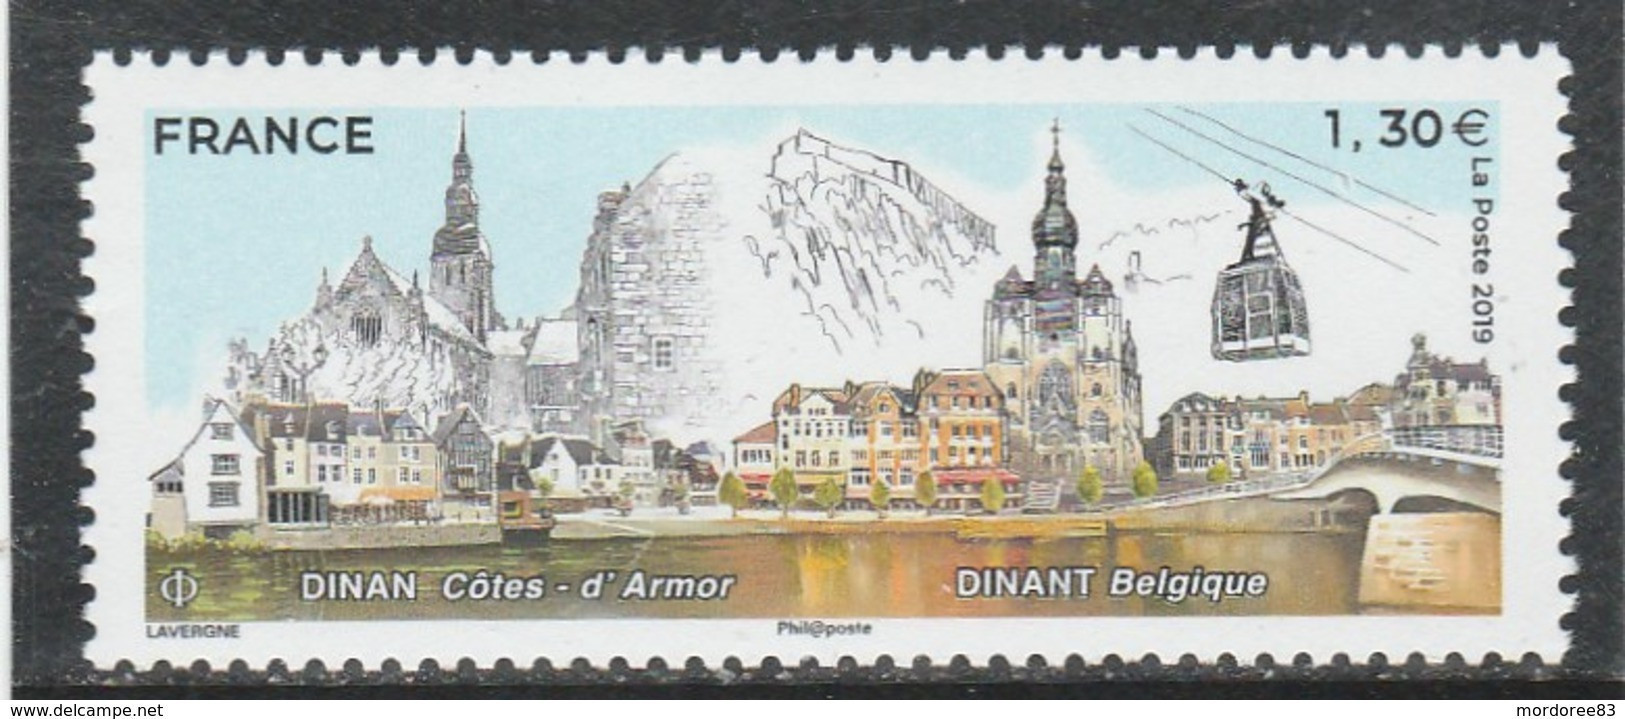 FRANCE 2019 DINAN NEUF YT 5300 - Unused Stamps